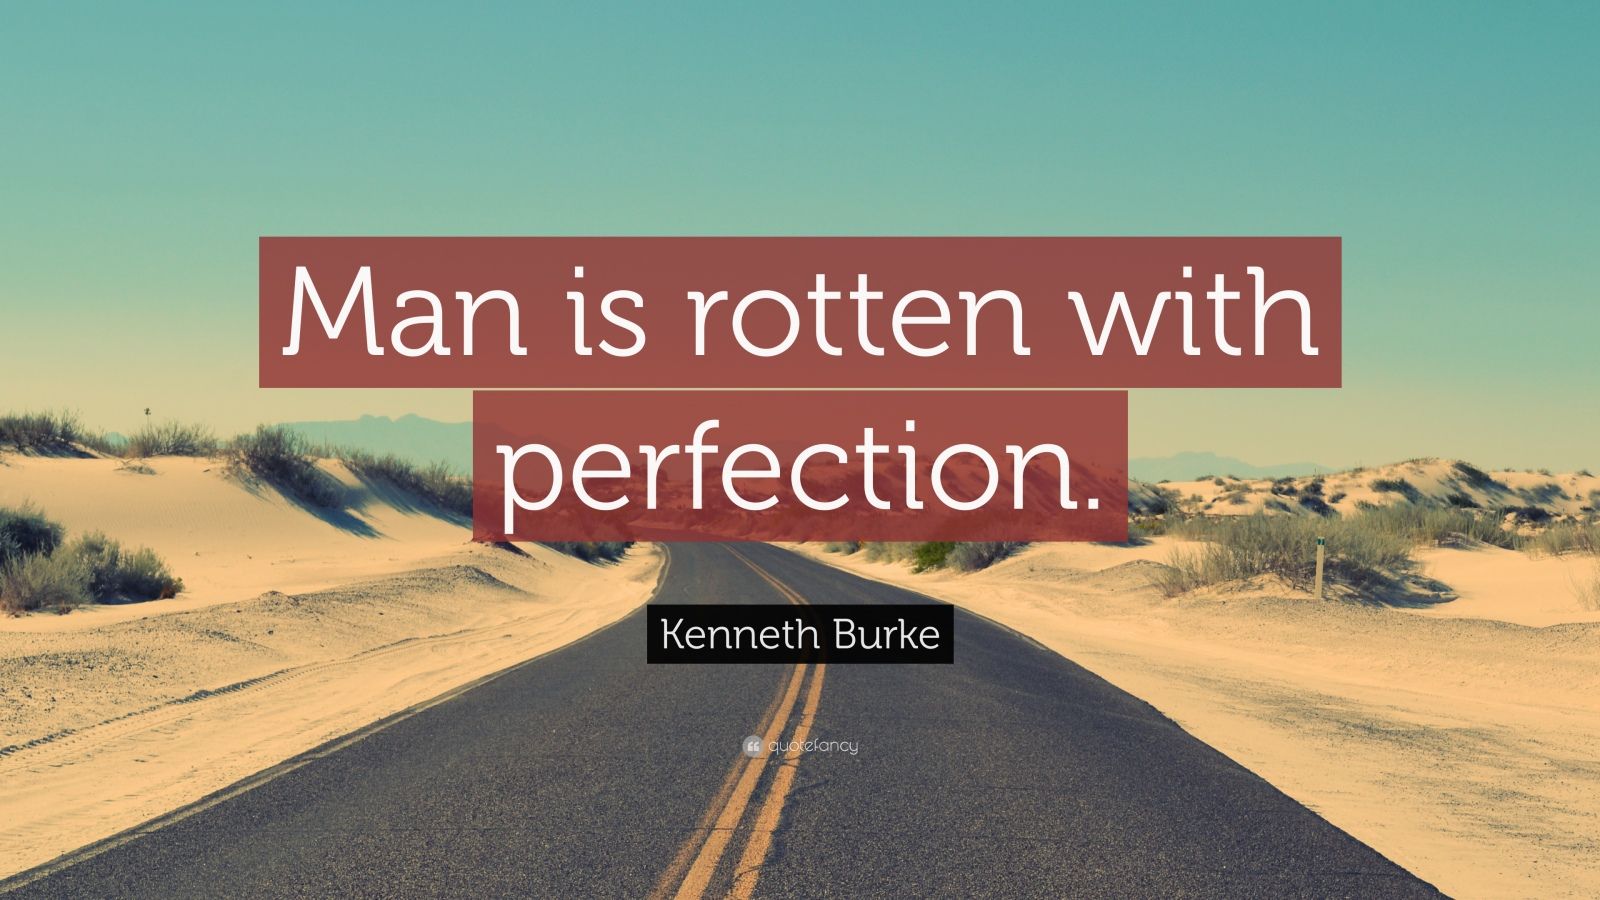 Kenneth Burke Quote: “Man is rotten with perfection.” (12 wallpapers) - Quotefancy1600 x 900